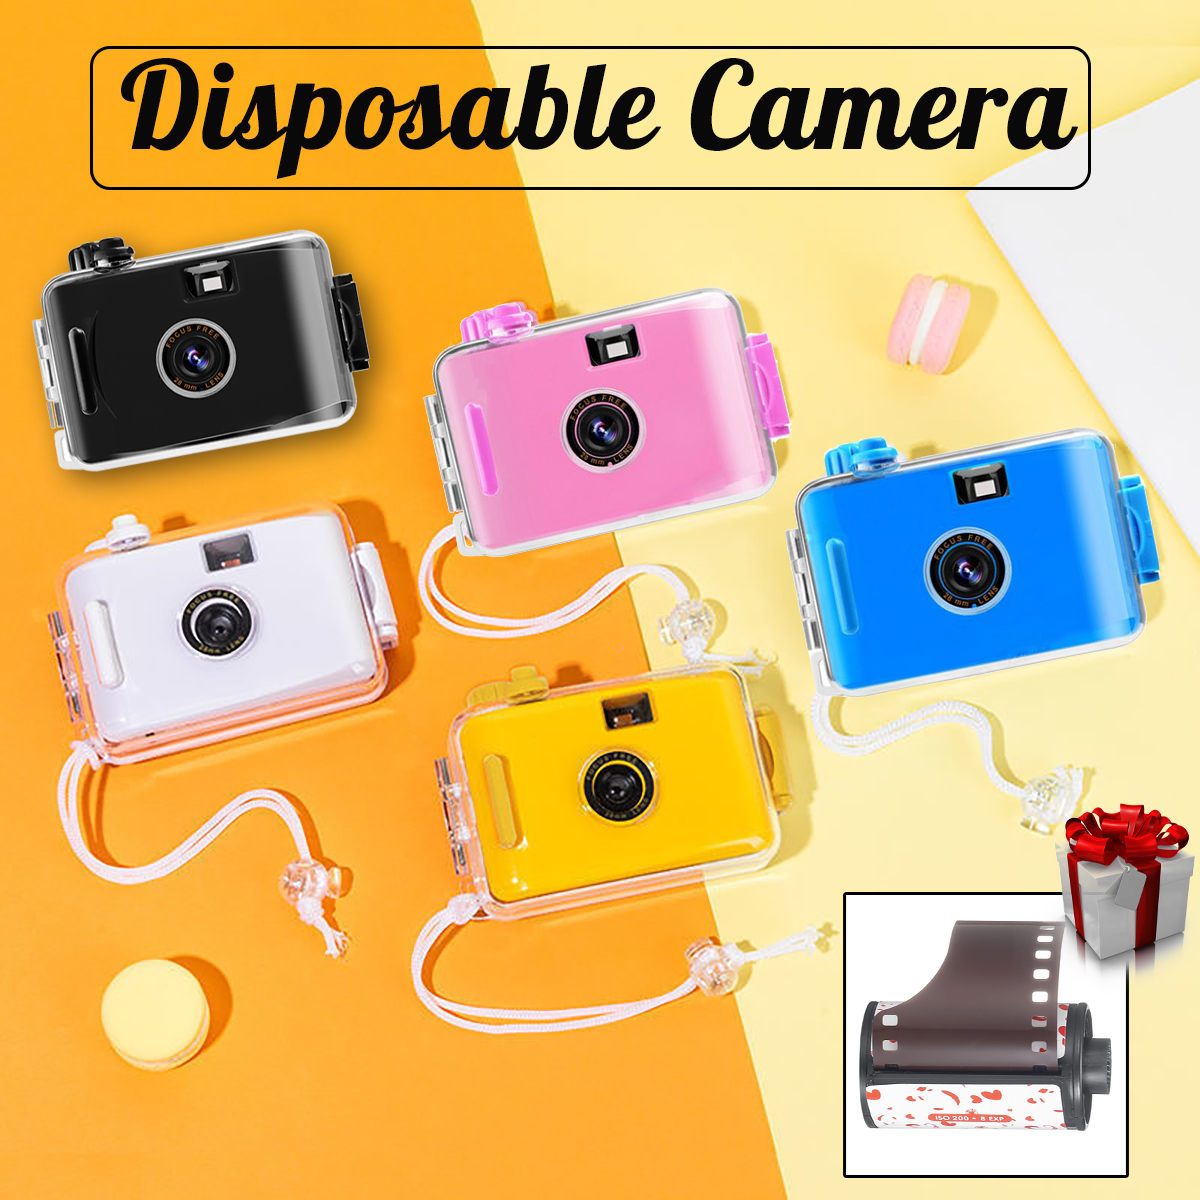 Waterproof-Disposable-Camera-Portable-Film-Camera-With-DIY-Case-for-Graduation-Trip-Christmas-1952625-2